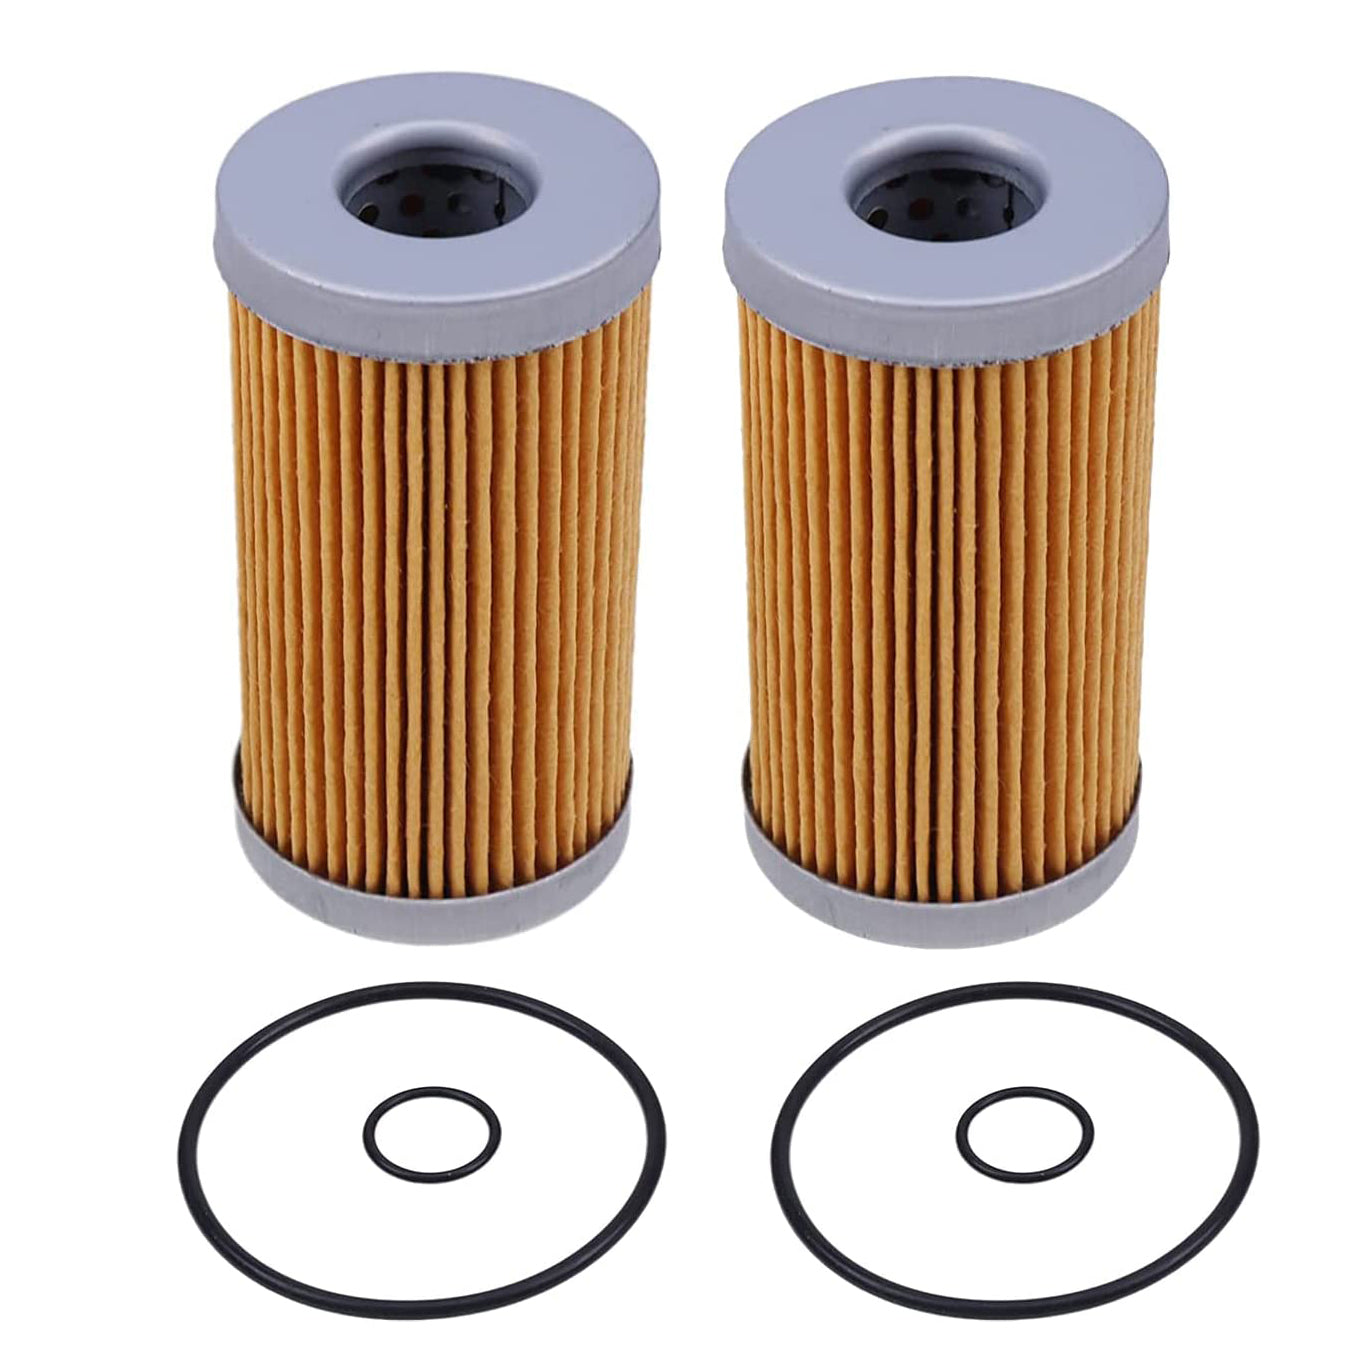 New 2X Fuel Filter W/O-Ring Compatible with Cub Cadet 7234 7235 7253 7260 7265 7272 7273 7274 7192 7193 7194 7195 7200 7205 7232 7233